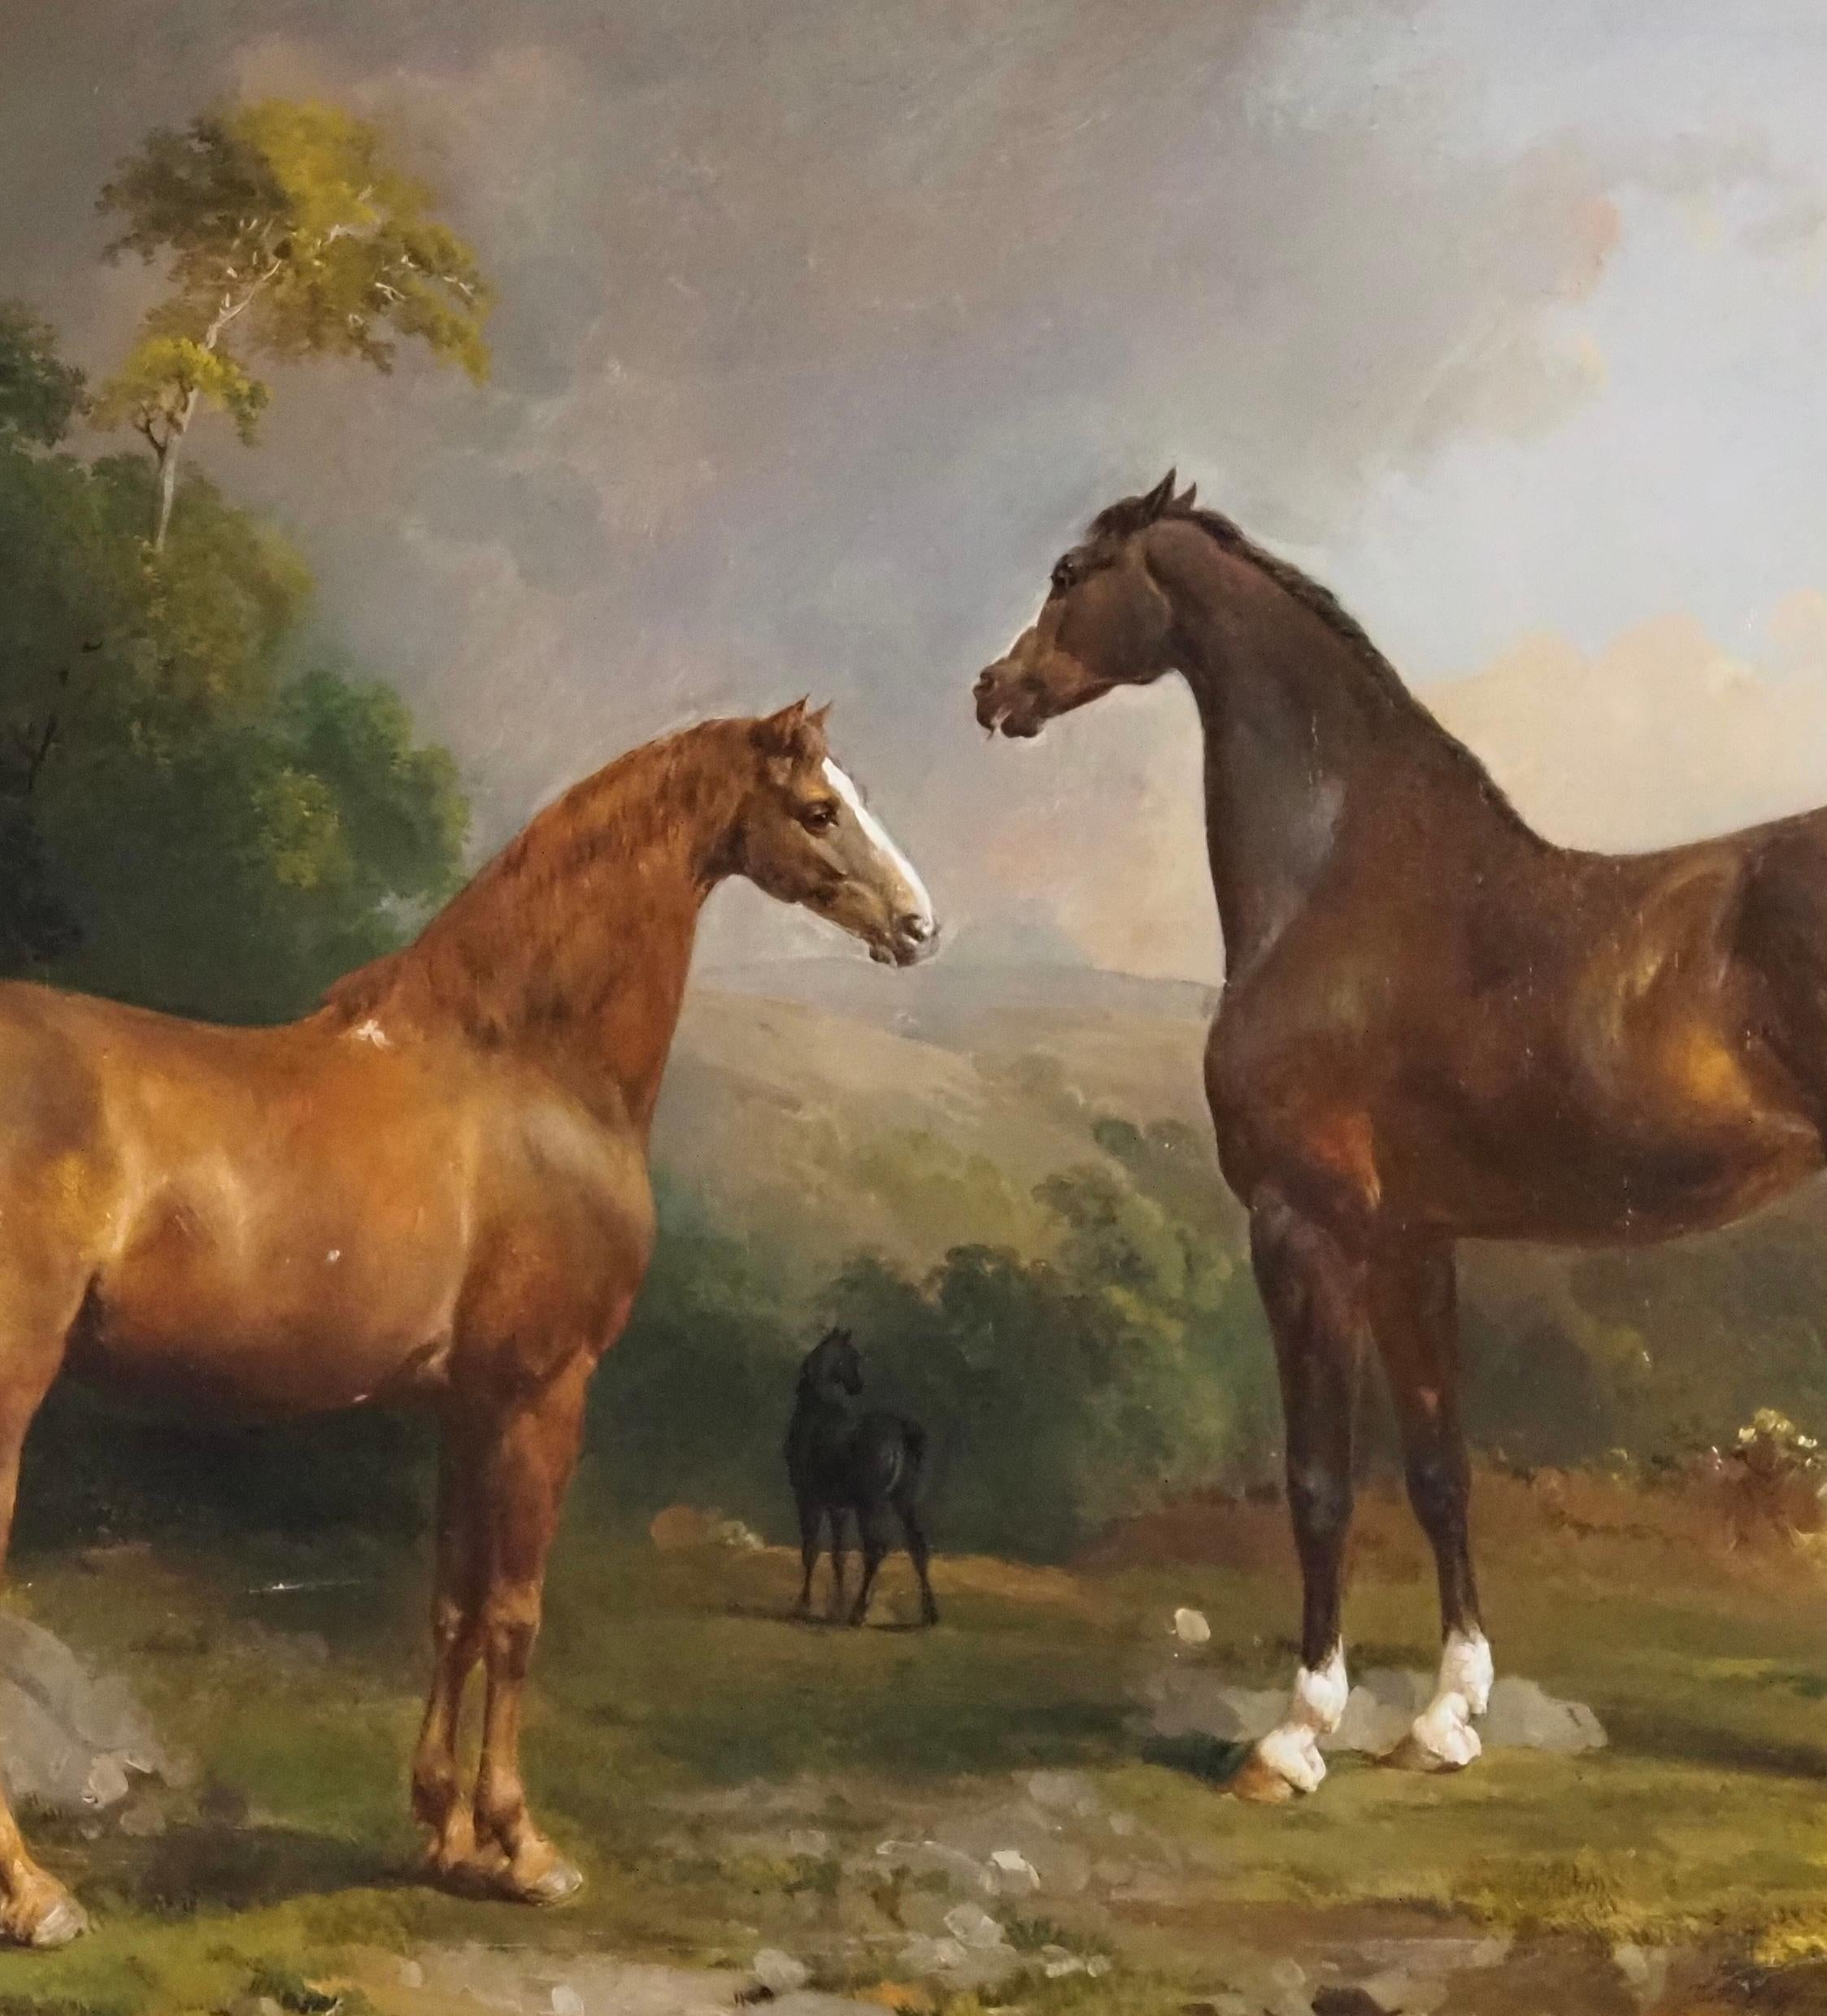 Thomas Mogford (1809-1868)
Three horses in a woodland landscape
signed and dated 'Thos Mogford. 1838' (lower right)
Oil on canvas
Canvas size - 25 x 30 in
Framed size - 29 1/2 x 34 1/2 in

